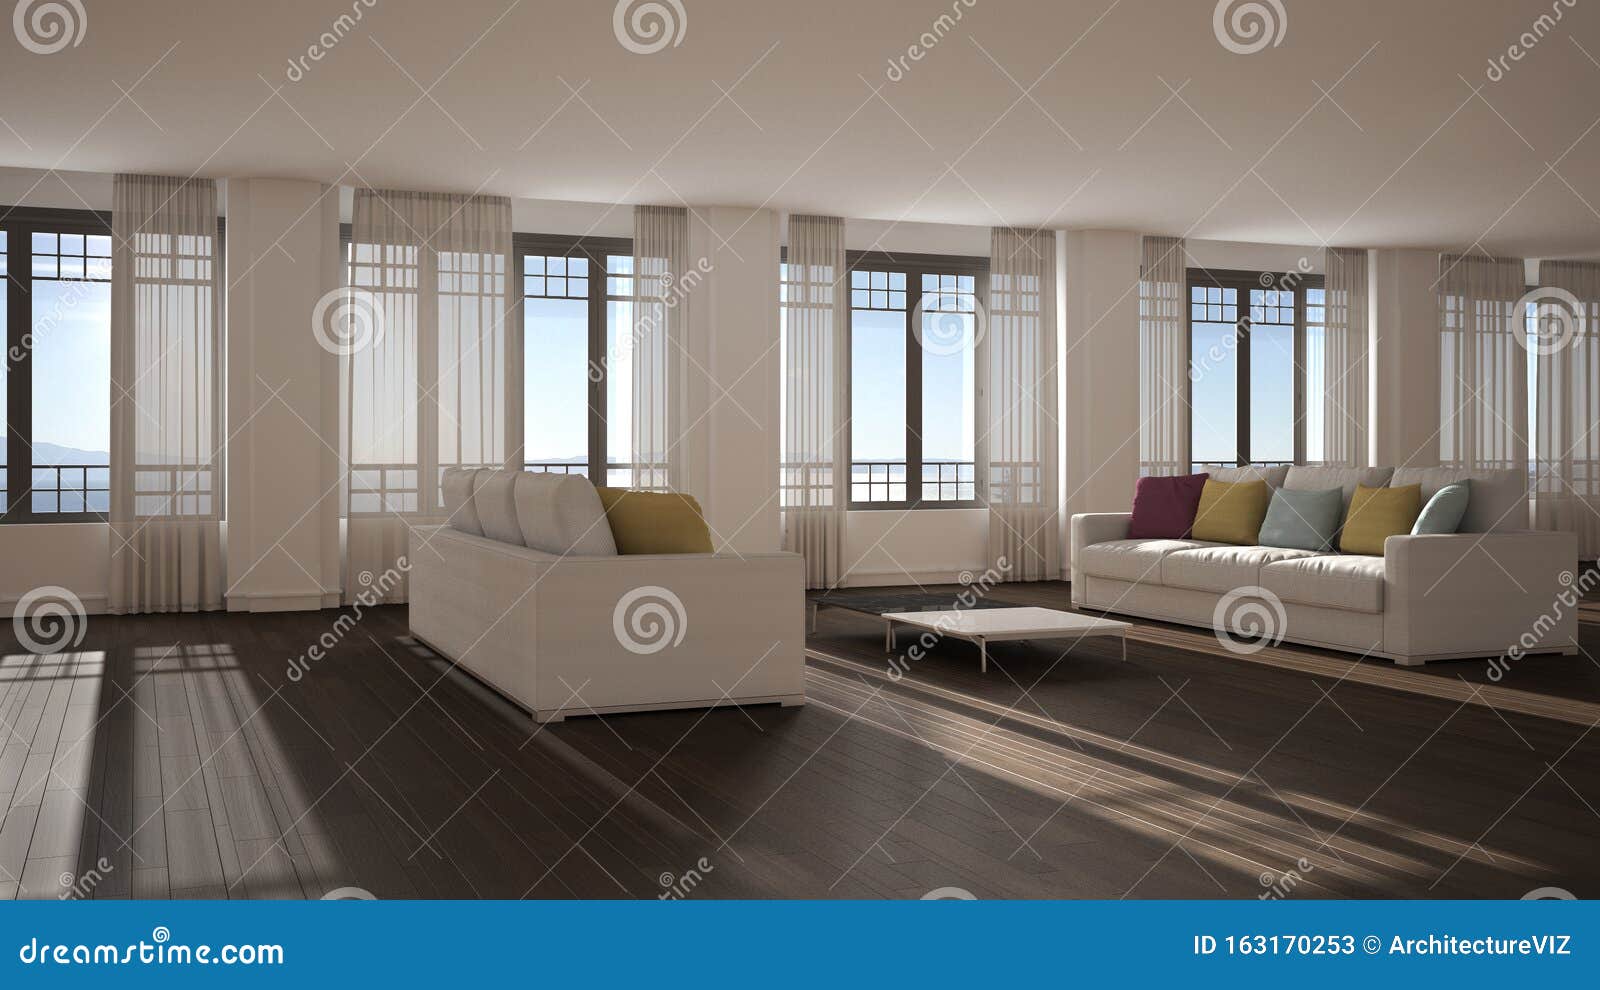 Open Space With Sofa Interior Design Modern Living Room Lounge With Big Panoramic Windows With Curtains And Sea View Parquet Stock Image Image Of Elegance Interior 163170253,Handmade Greeting Card Border Designs Simple